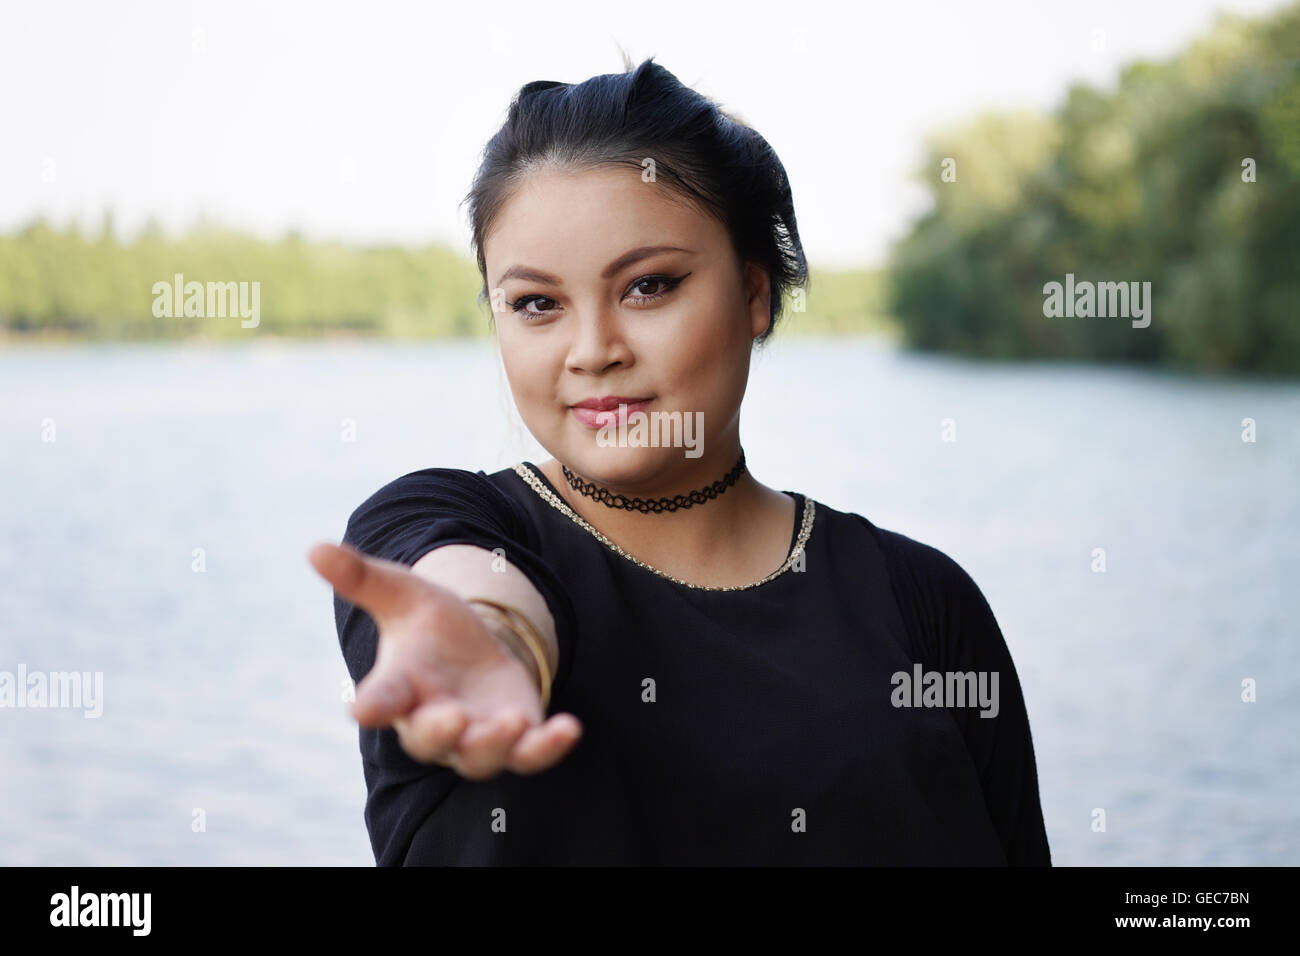 young asian woman reaching out Stock Photo